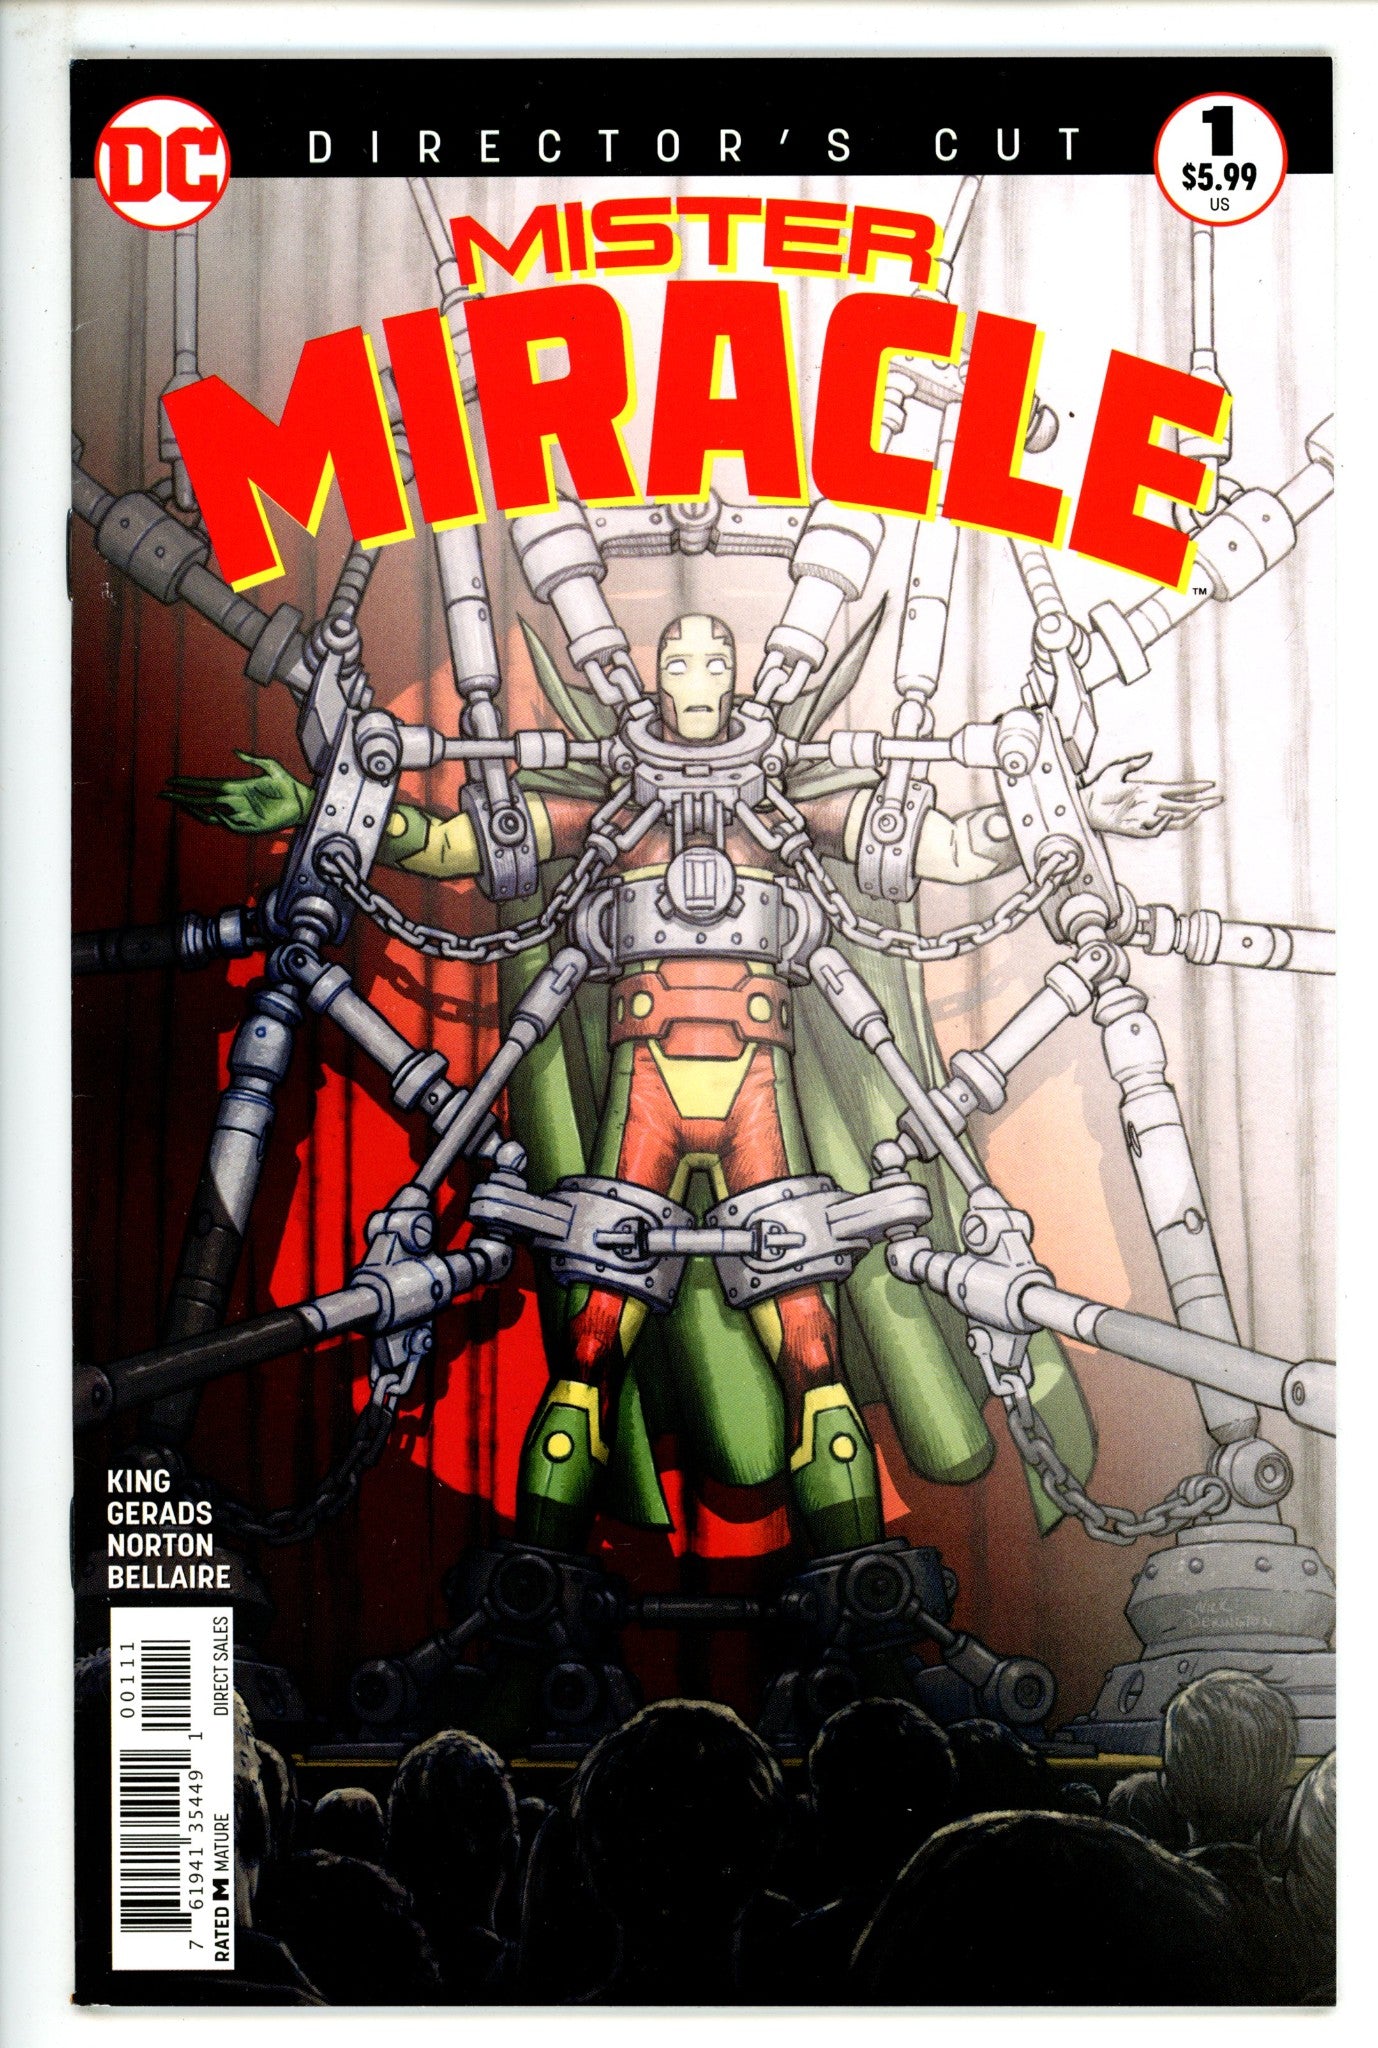 Mister Miracle #1 Director's Cut Vol 4 1 High Grade (2018) 